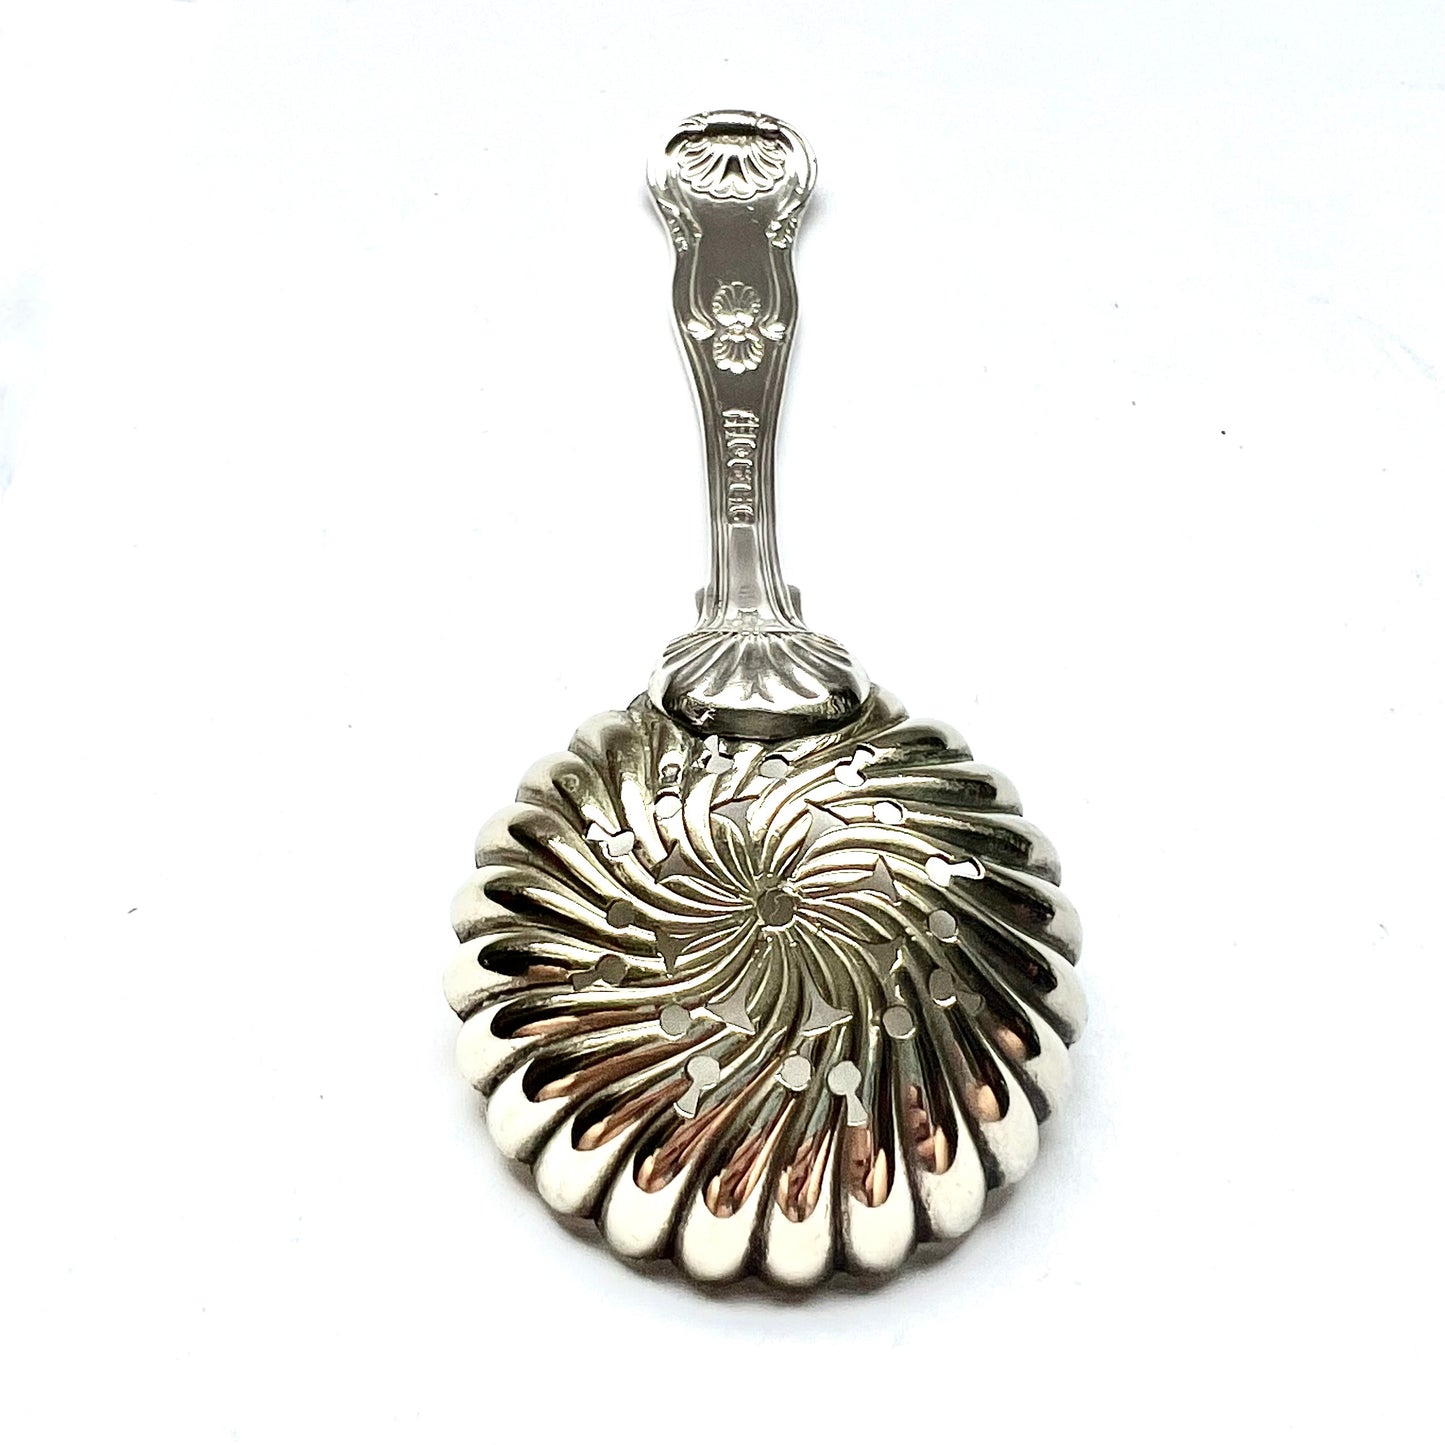 Antique 19th century sterling silver George IV sugar sifter spoon with marks for London, 1827, Morris & Michael Emanuel.